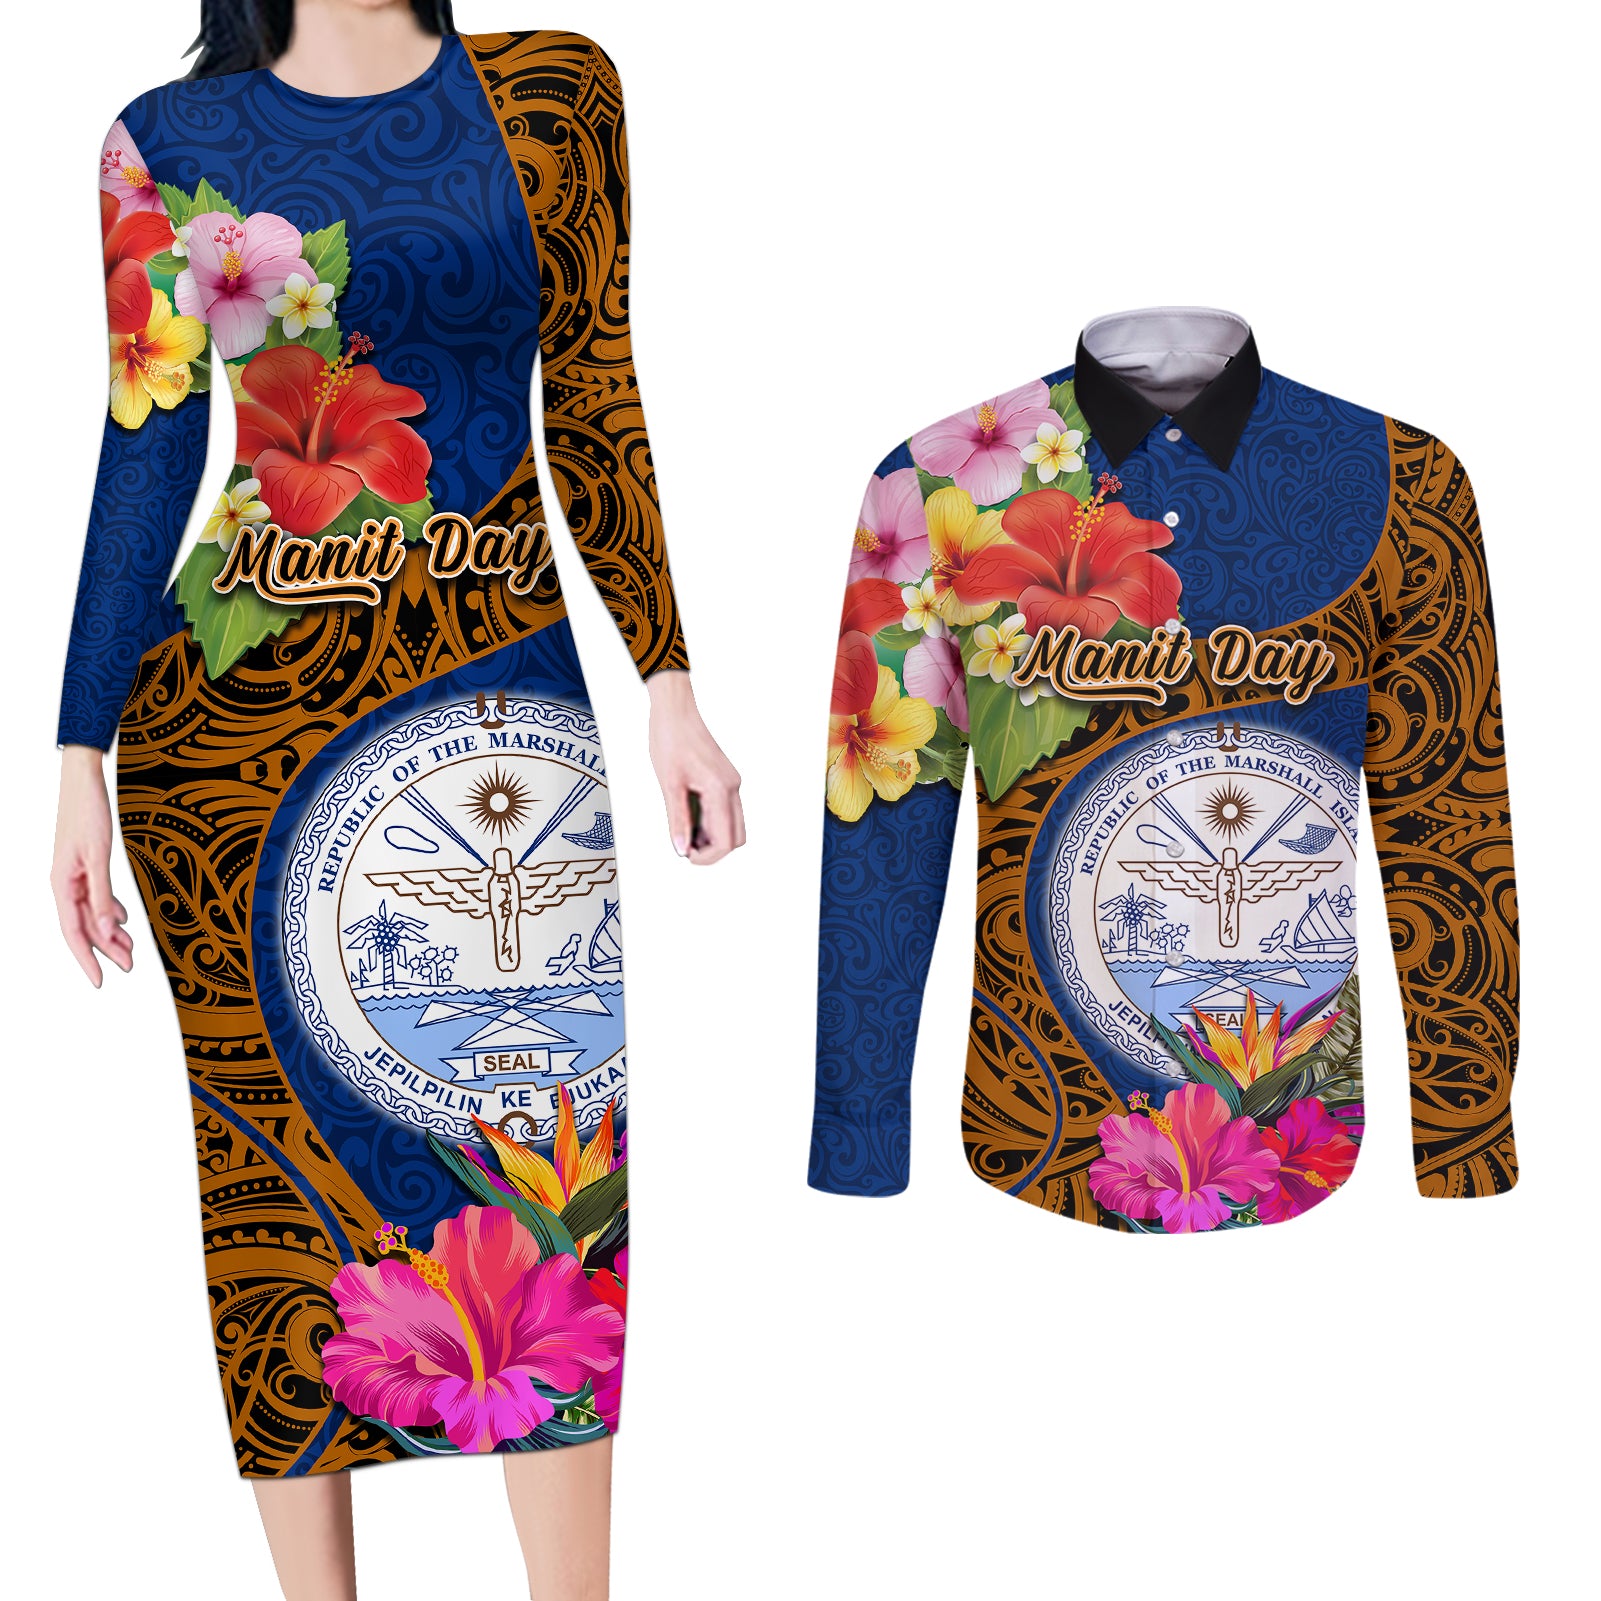 marshall-islands-manit-day-couples-matching-long-sleeve-bodycon-dress-and-long-sleeve-button-shirts-marshall-seal-mix-hibiscus-flower-maori-pattern-style